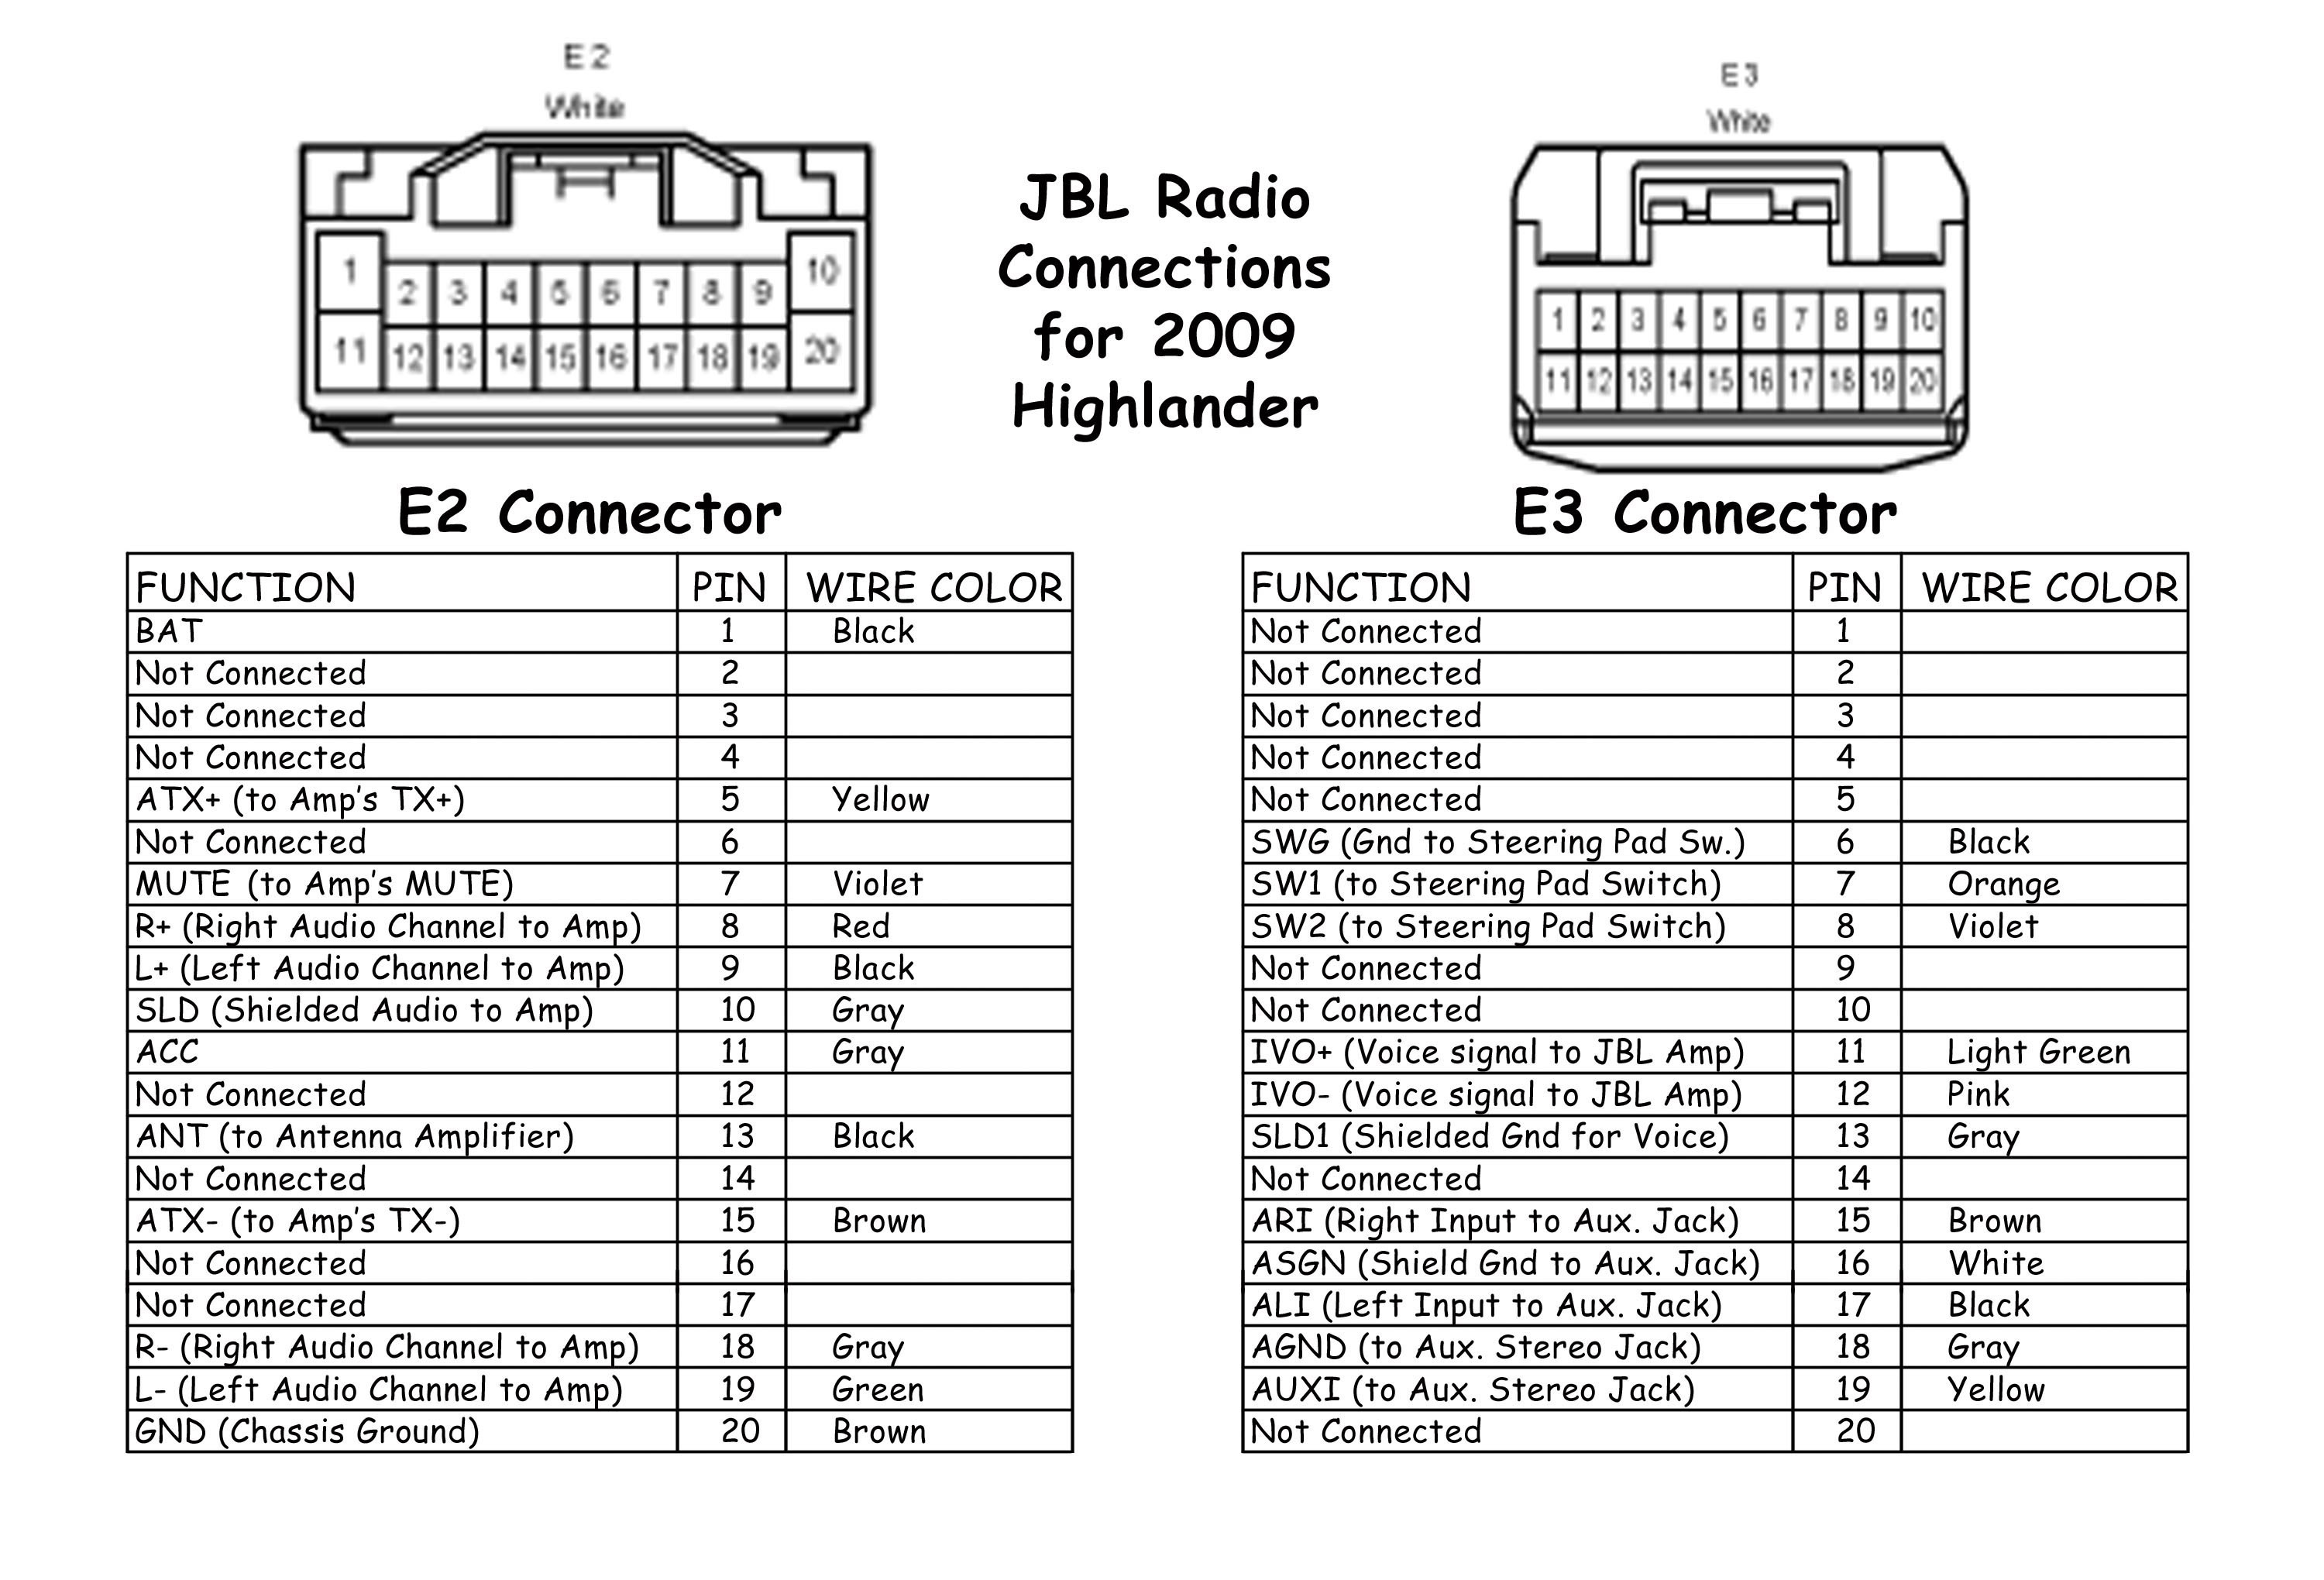 Aftermarket Radio Wiring Diagram New Magnificent 1992 toyota Stereo Wiring Diagram Gallery Electrical